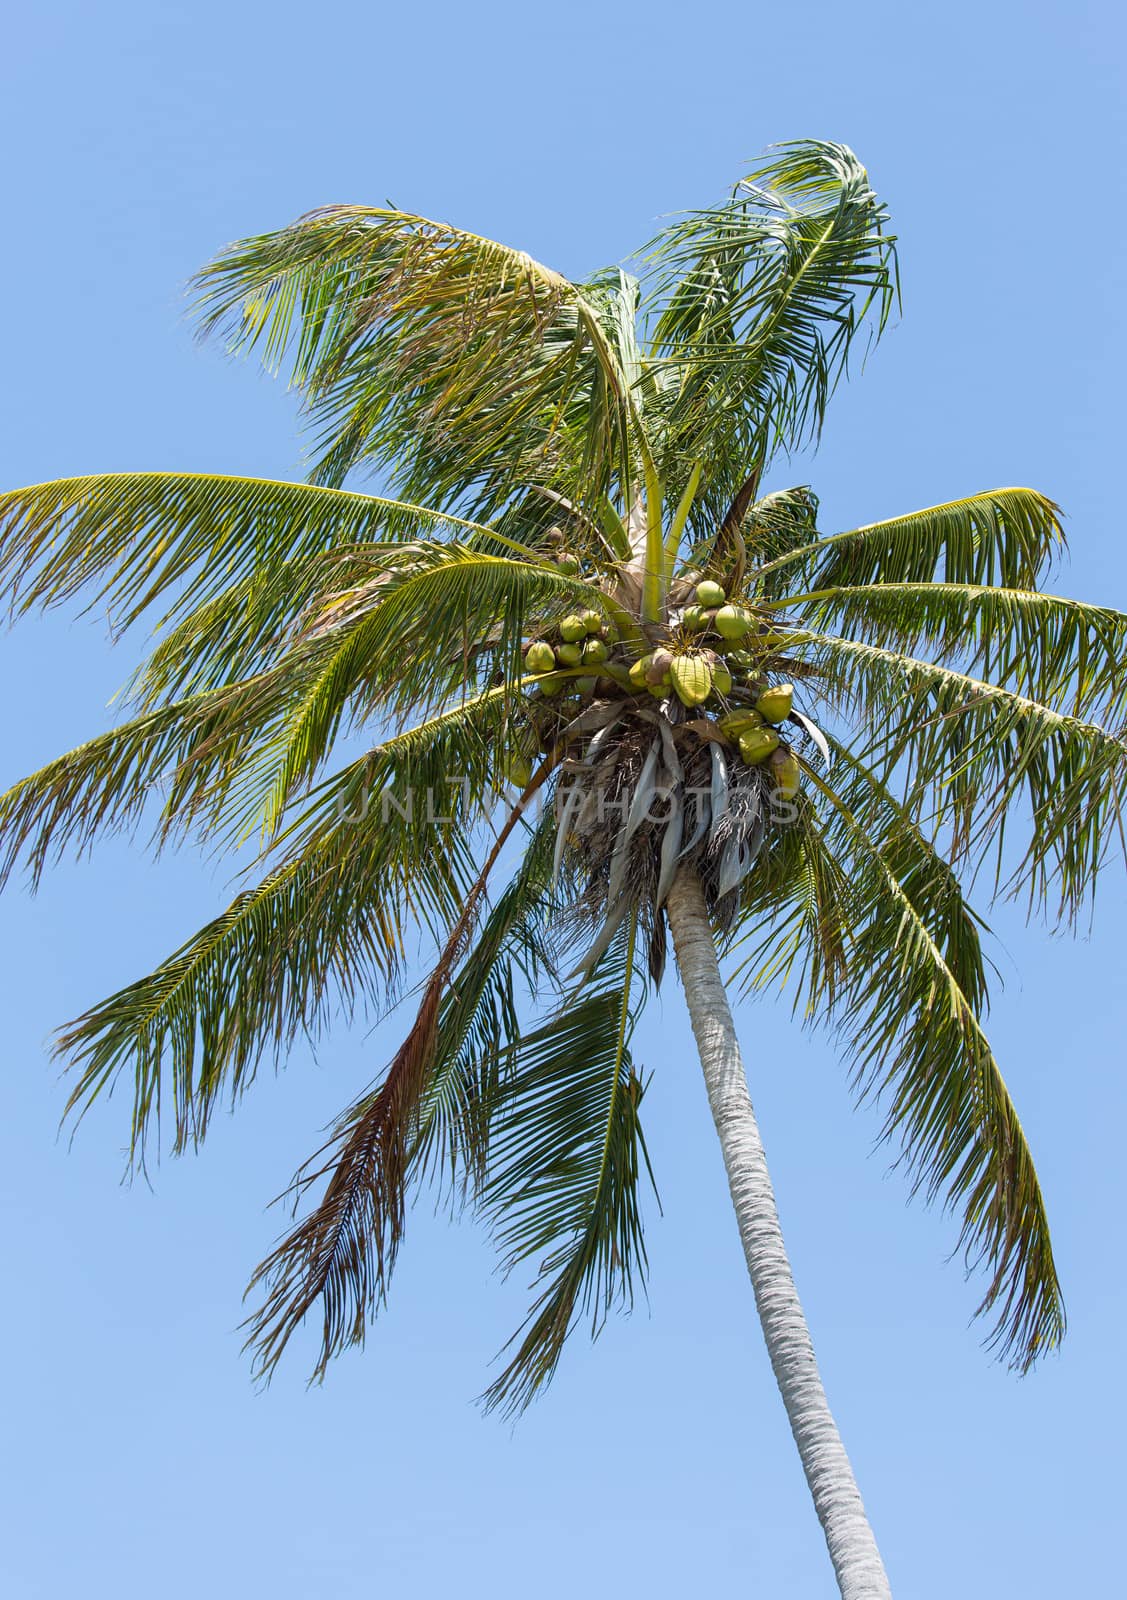 This windblown palm tree is carrying a large number of coconuts.